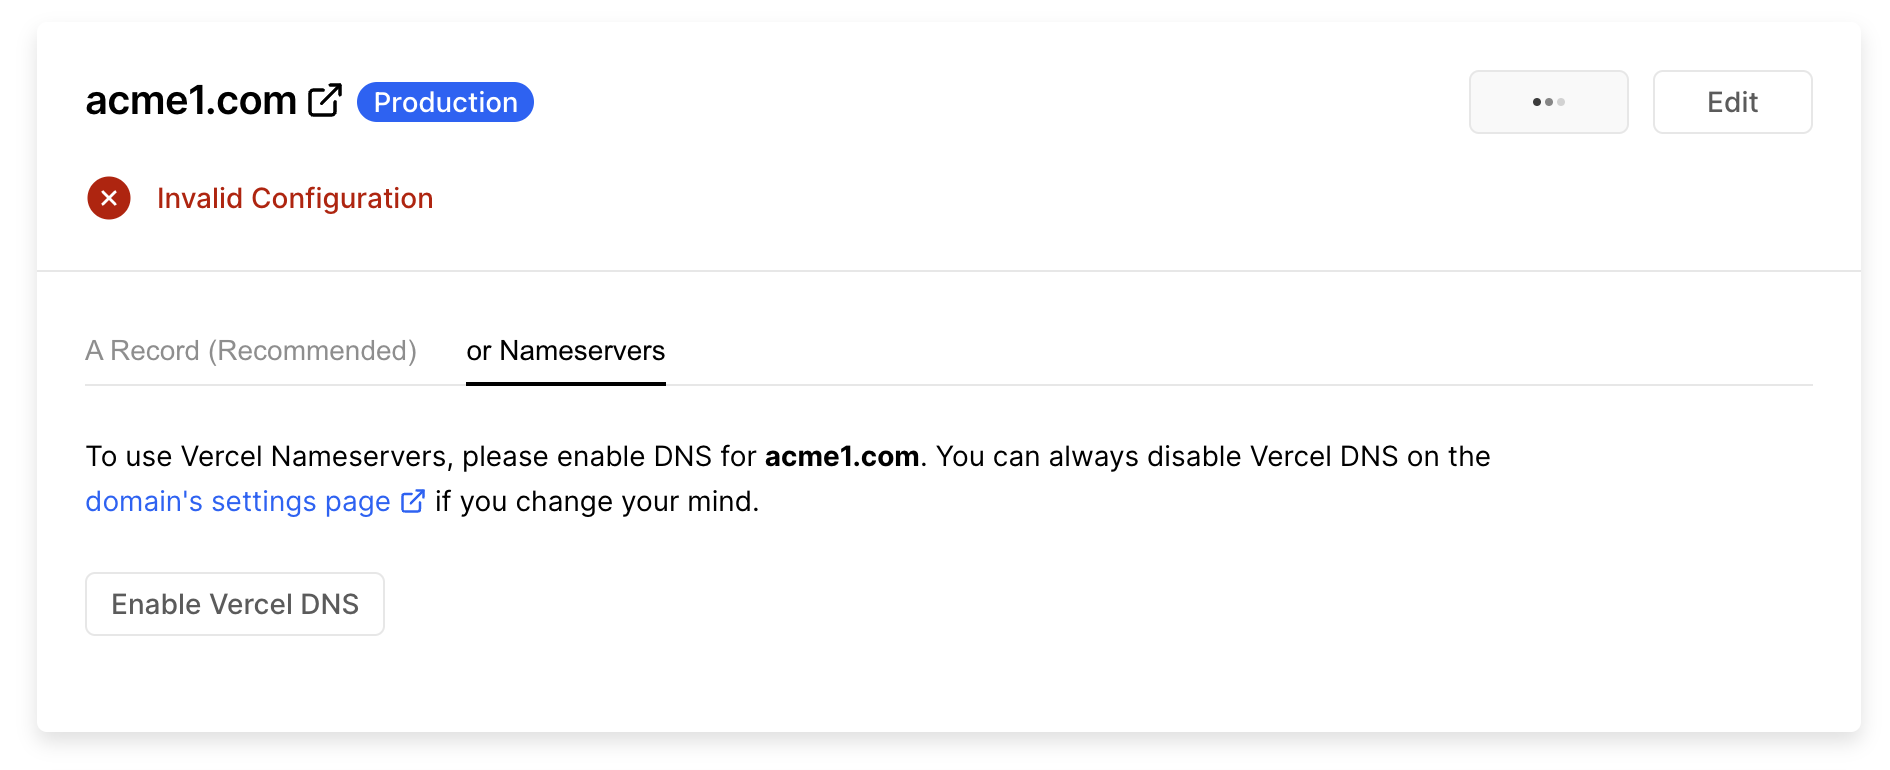 Instructions on opting in to use Vercel Nameservers.